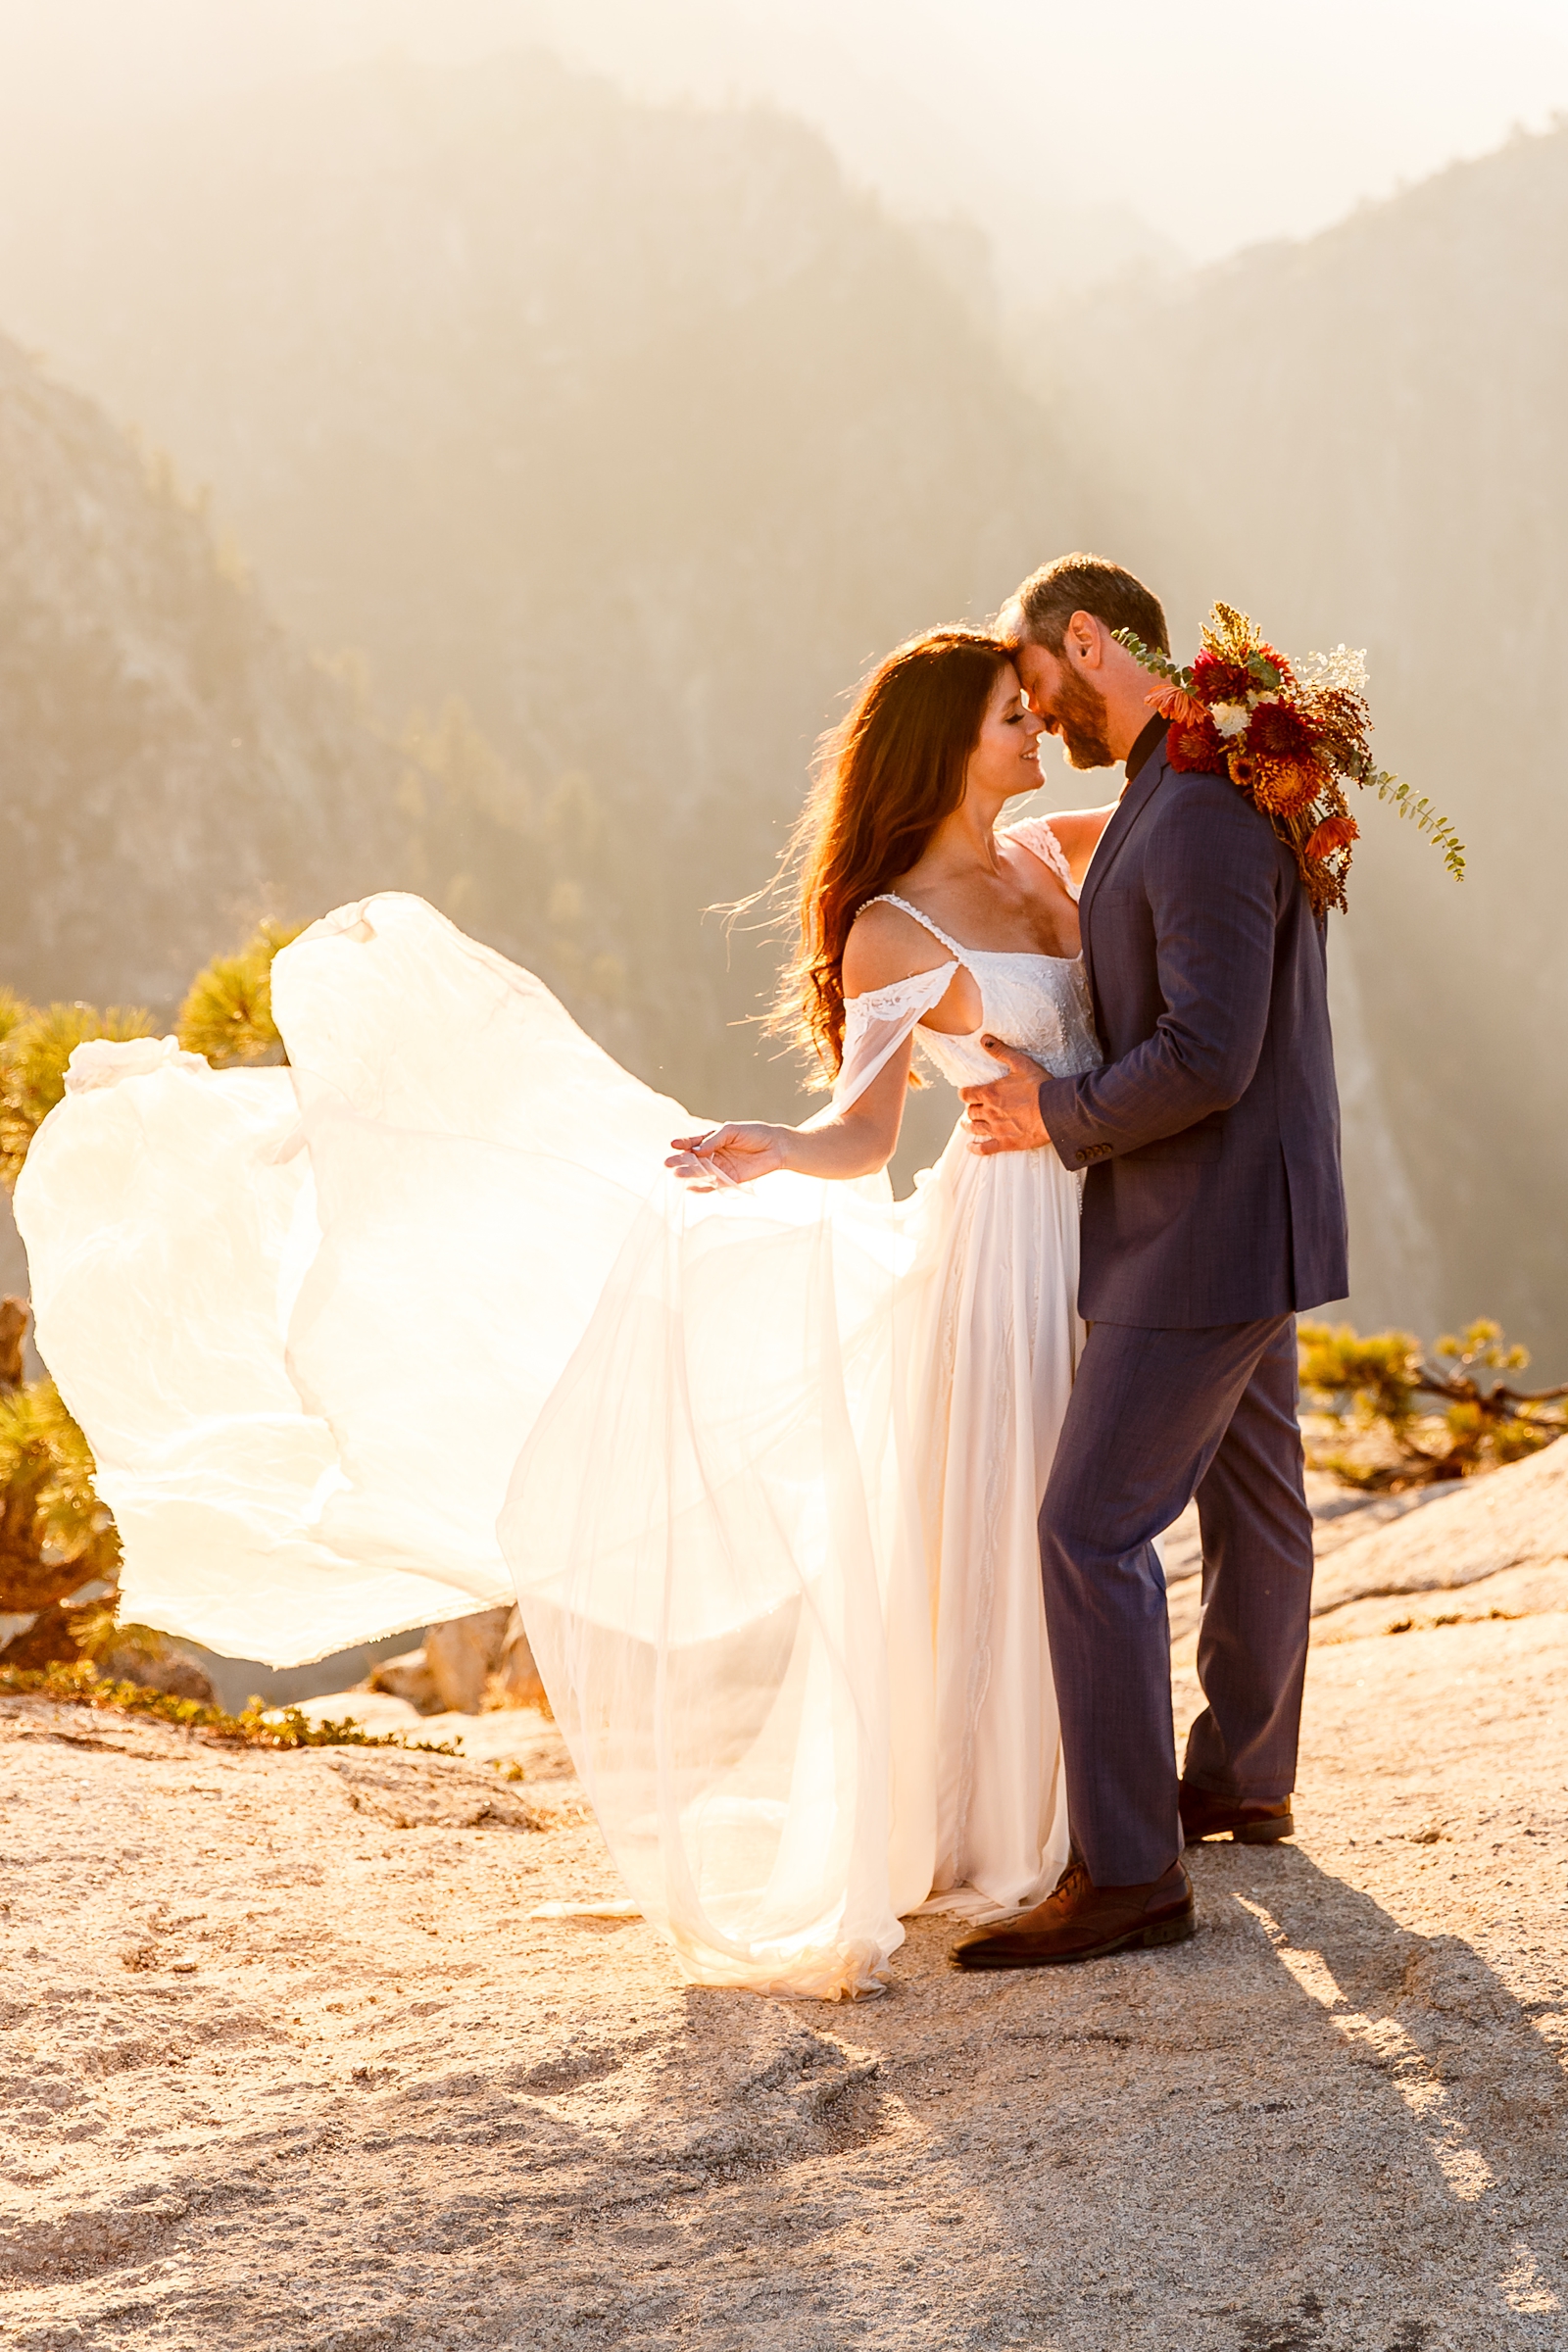 Gorgeous wedding gown fluttering in the wind at this couple's Yosemite elopement.